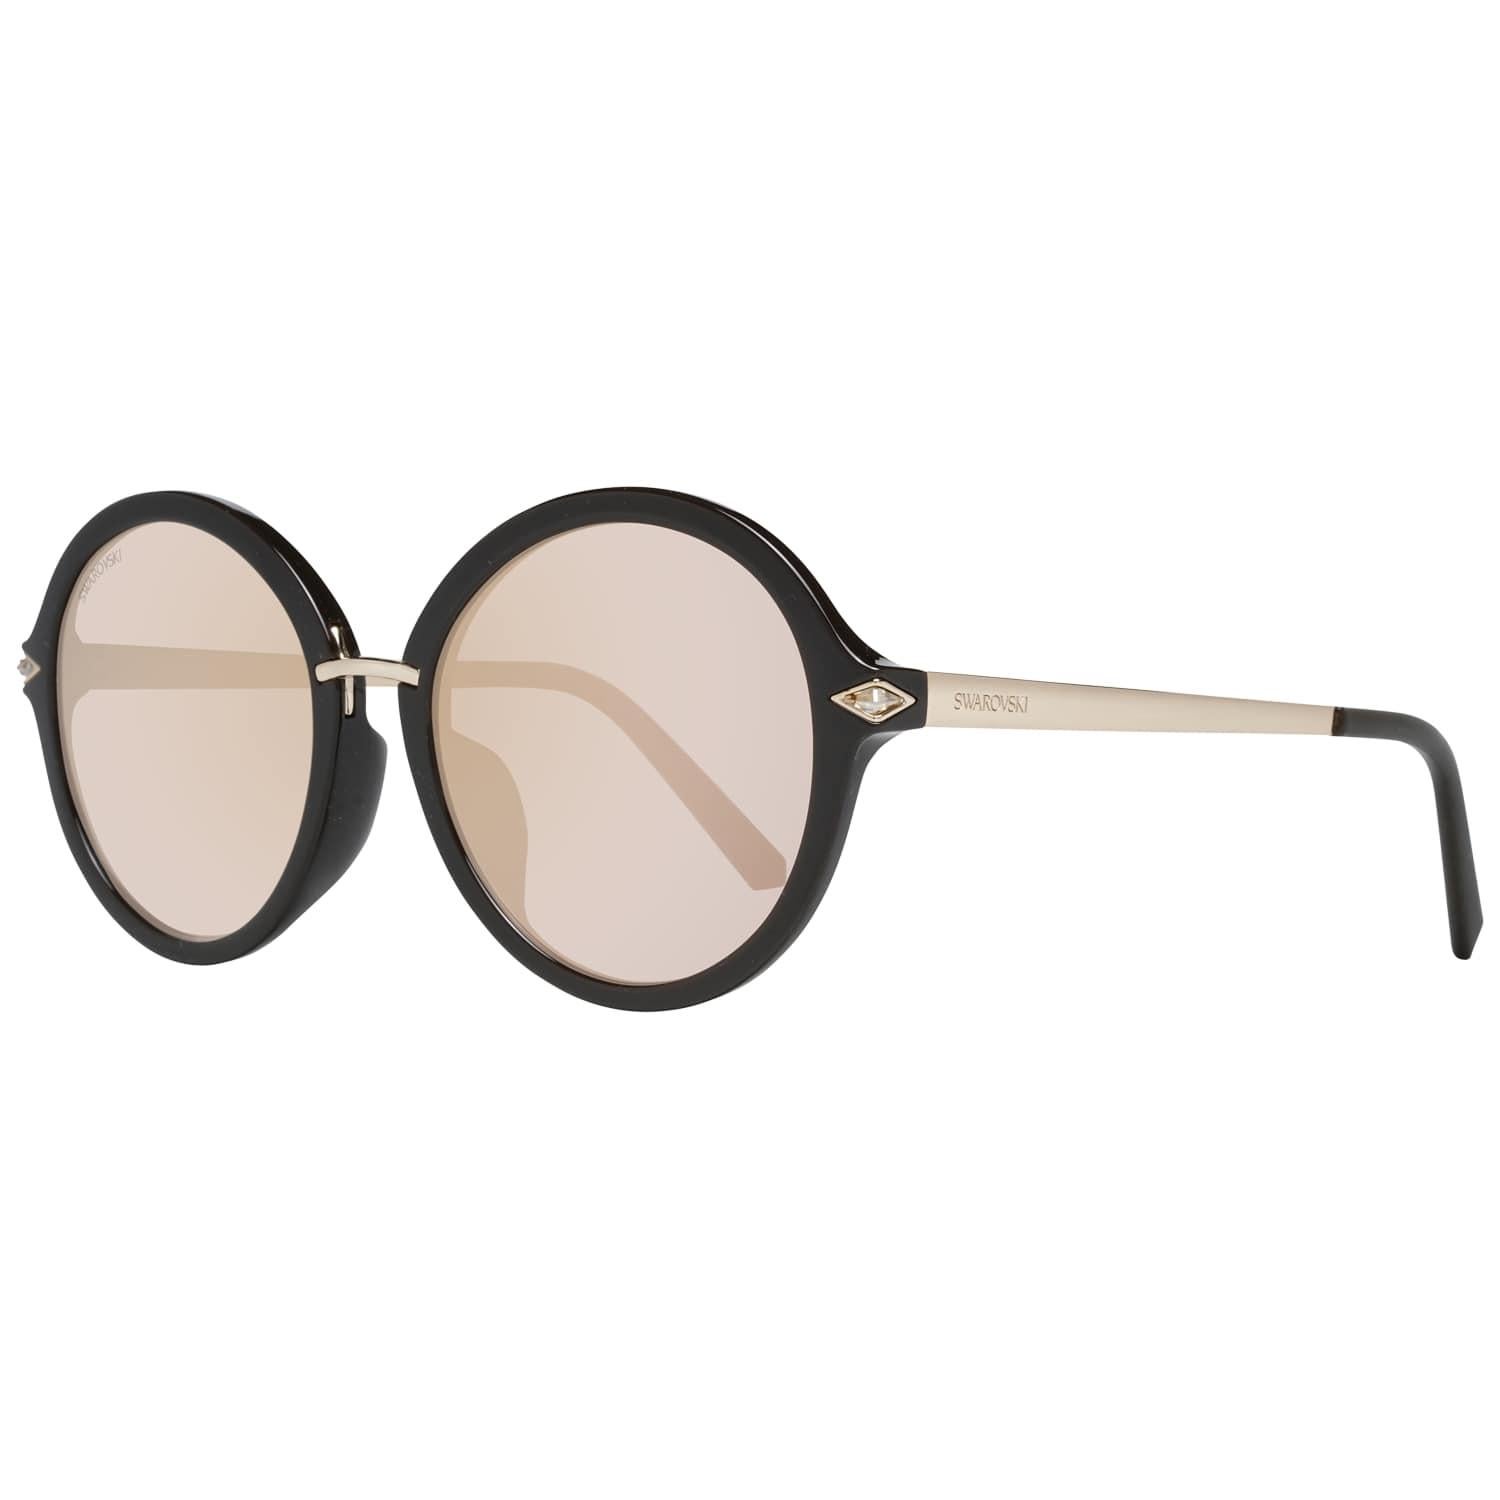 DetailsMATERIAL: AcetateCOLOR: BrownMODEL: SK0184-D 5448UGENDER: WomenCOUNTRY OF MANUFACTURE: ChinaTYPE: SunglassesORIGINAL CASE?: YesSTYLE: OvalOCCASION: CasualFEATURES: LightweightLENS COLOR: BronzeLENS TECHNOLOGY: MirroredYEAR MANUFACTURED: